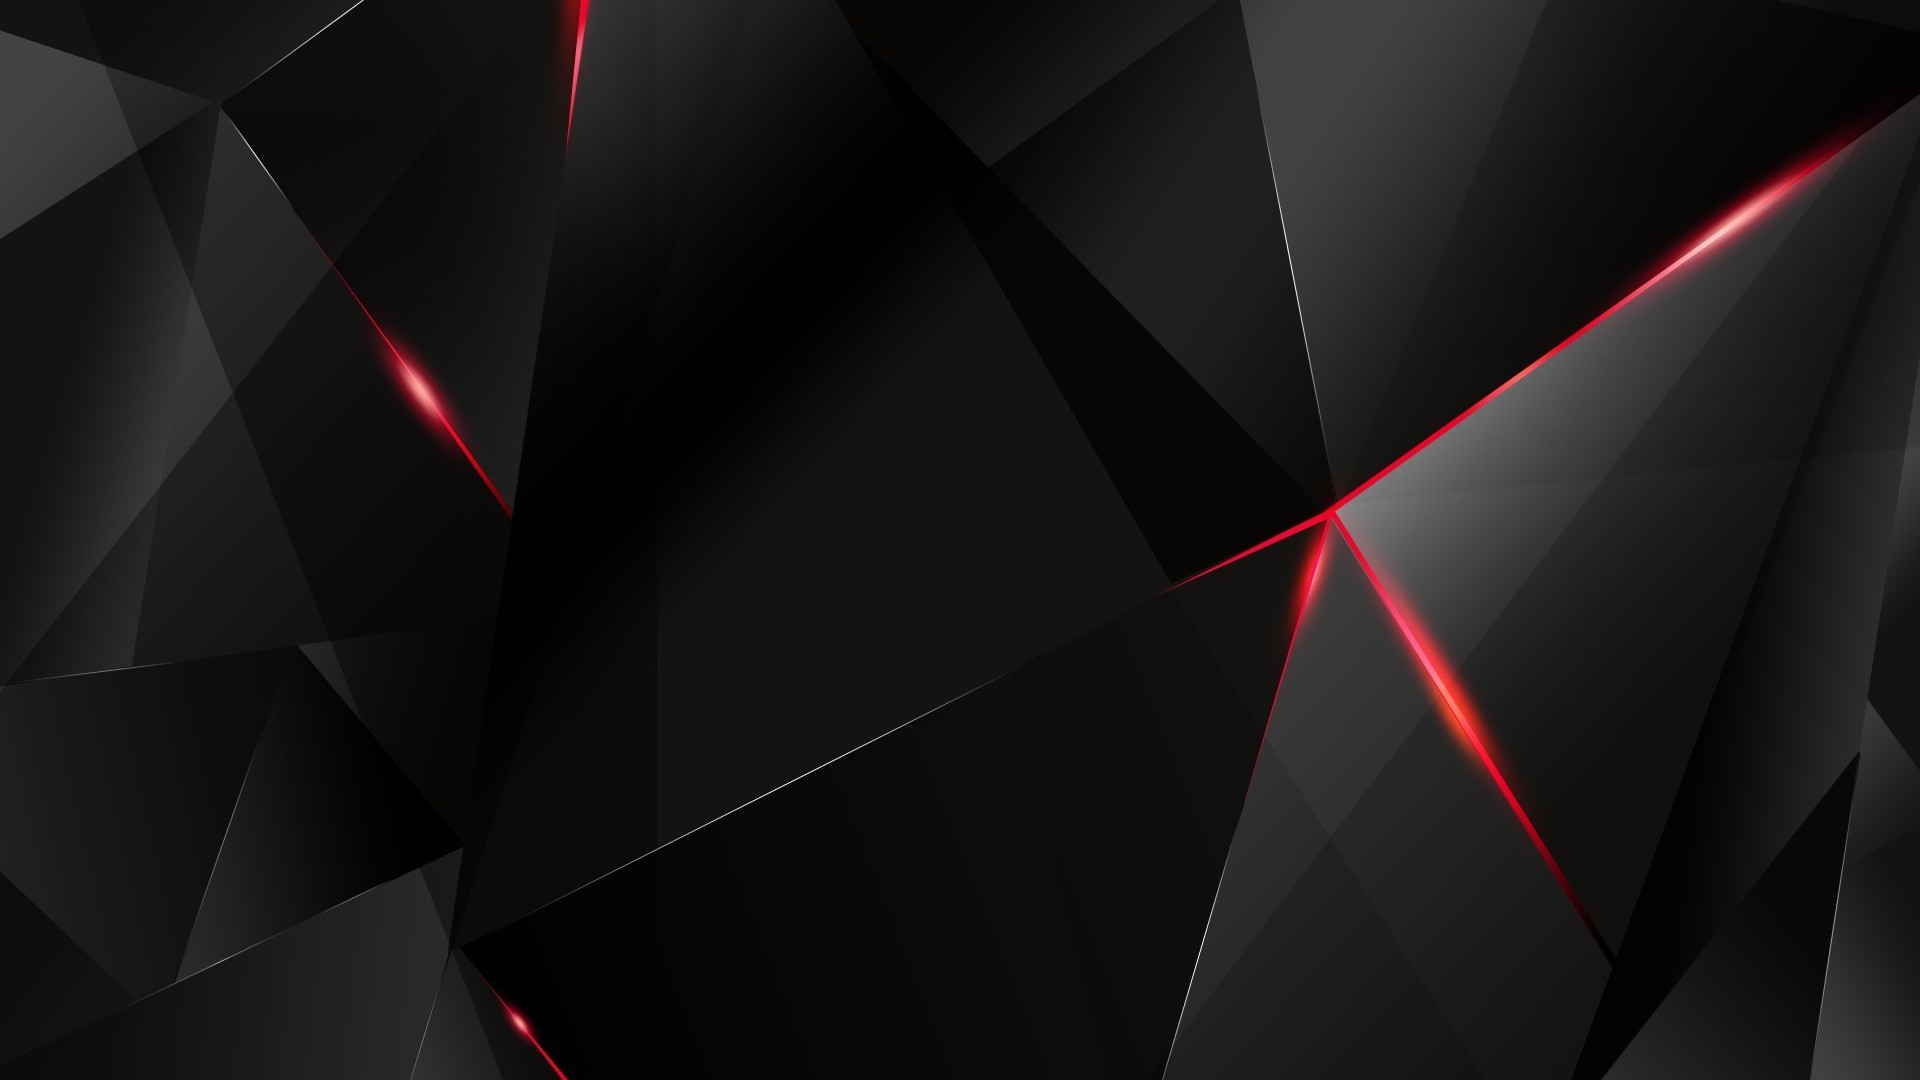 Red Black Abstract Wallpaper newhairstylesformen2014com 1920x1080